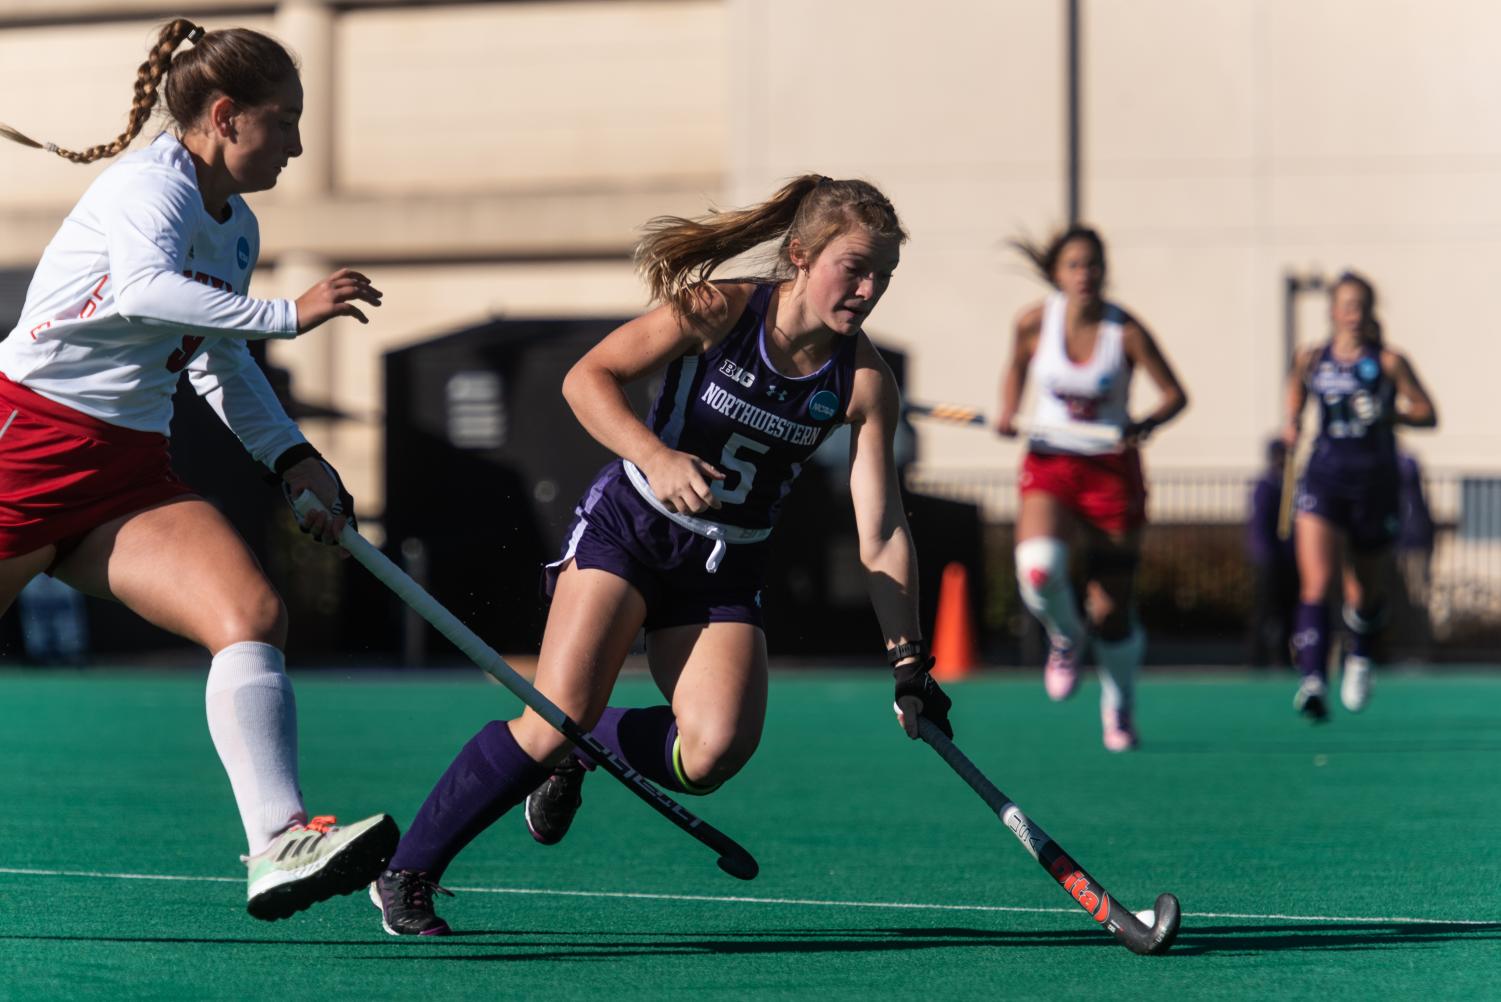 A field hockey player in a purple jersey with the number five runs ahead and uses the stick to keep the ball away from a player in a white jersey.